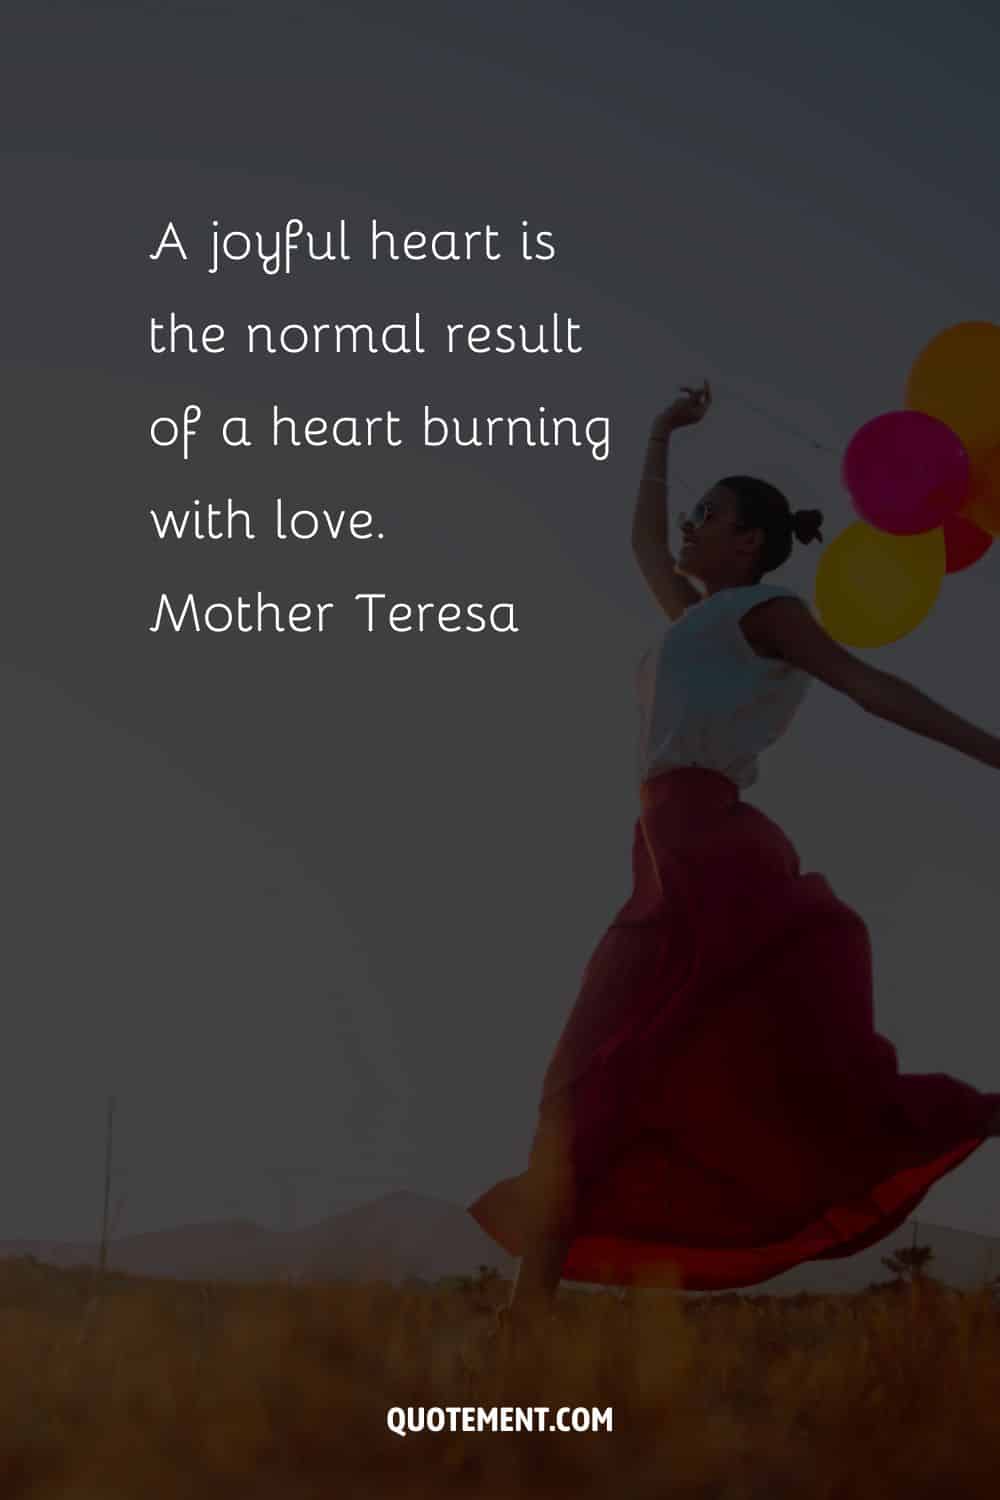 A joyful heart is the normal result of a heart burning with love